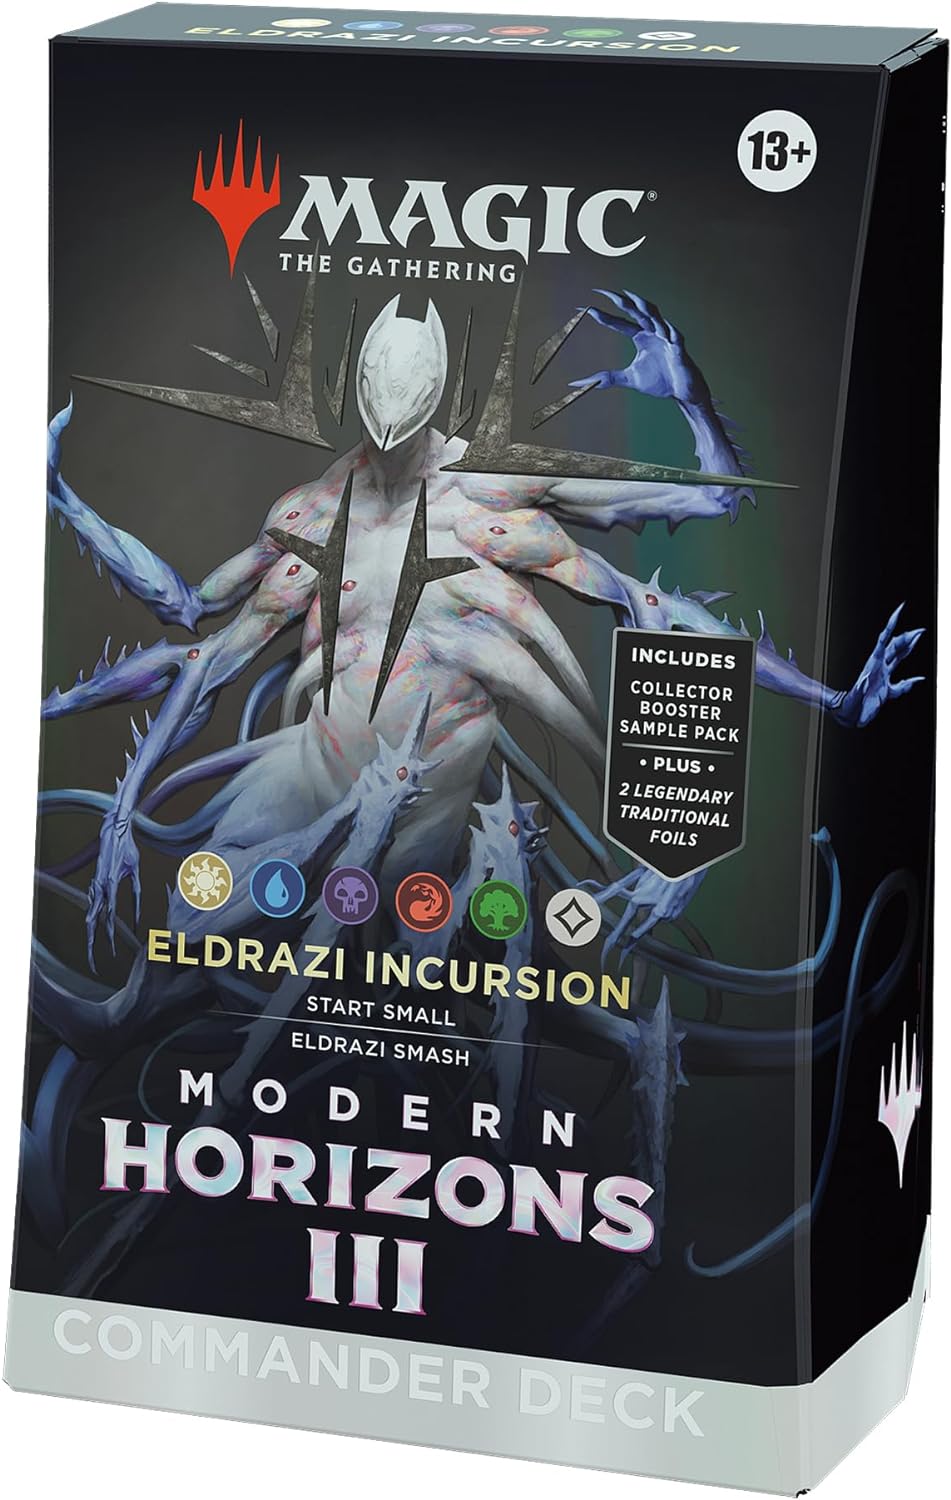 PRE-ORDER: Modern Horizons 3 Commander Deck – Eldrazi Incursion (100-Card Deck, 2-Card Collector Booster Sample Pack + Accessories), Trading Cards made by Magic The Gathering. Exit 23 Games 